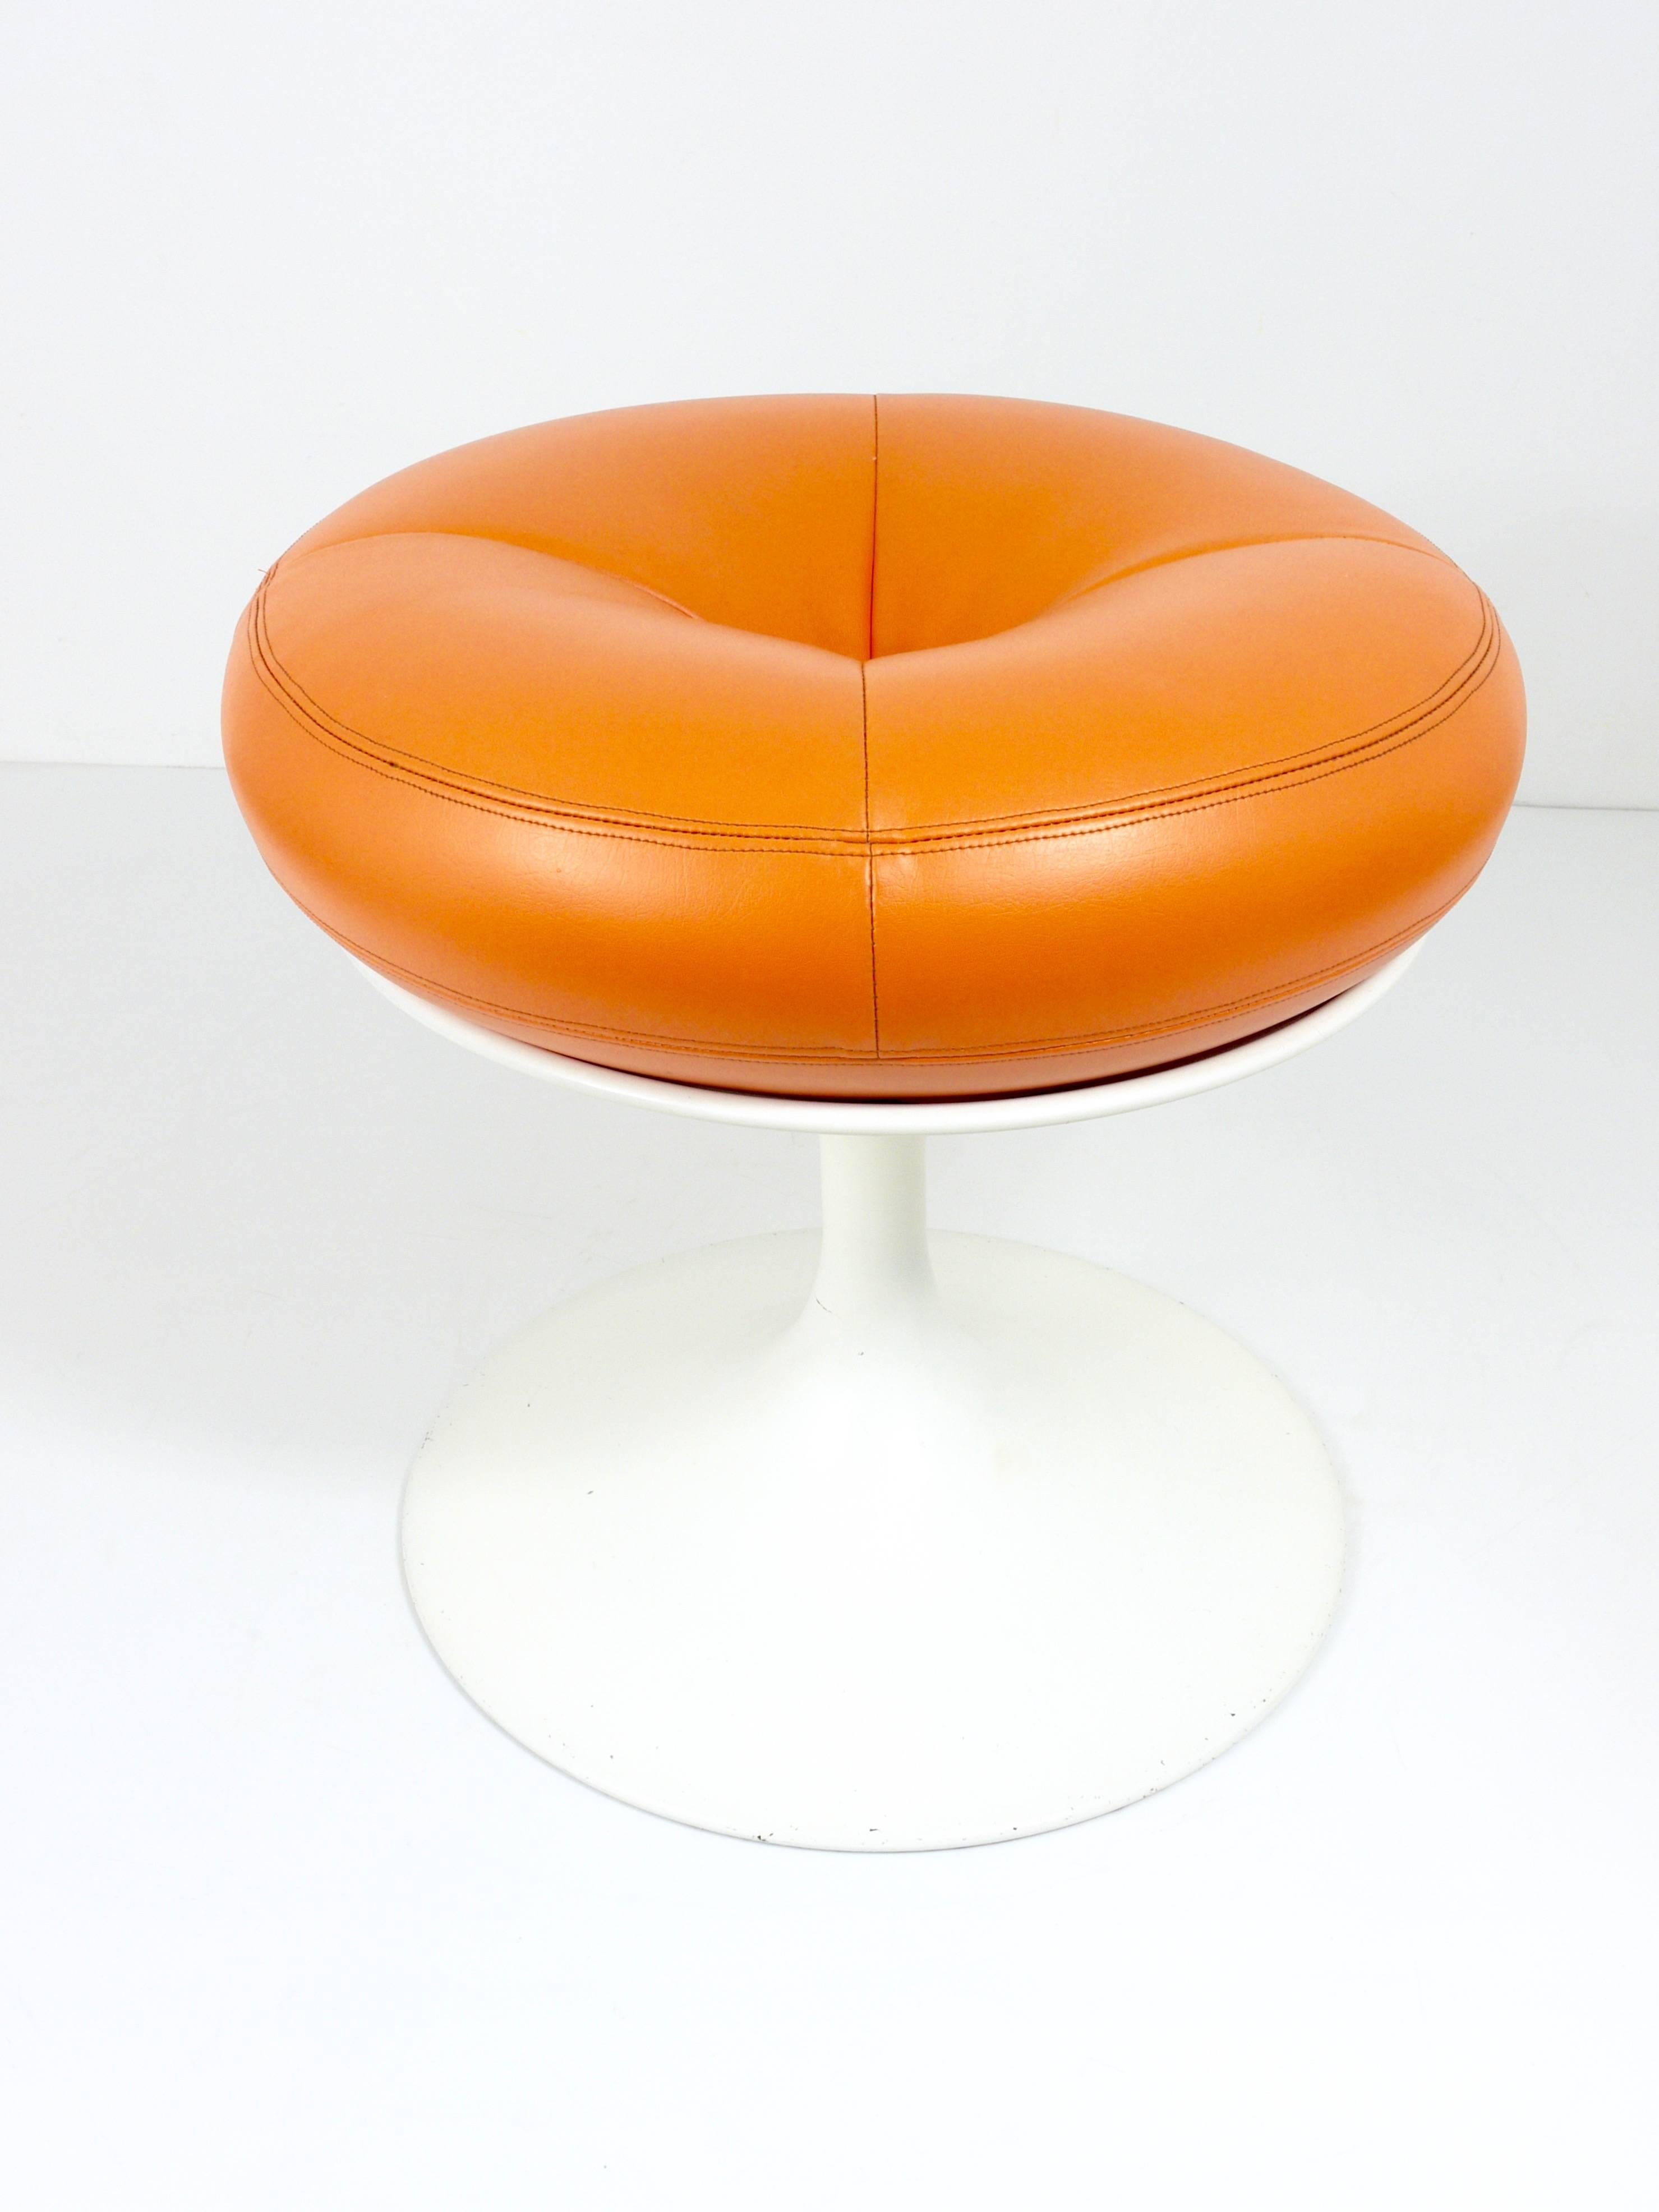 A beautiful stool with white tulip base and orange upholstery, designed by Borje Johanson for Johanson Design, Sweden. In very good condition with marginal patina. Label on the underneath. 